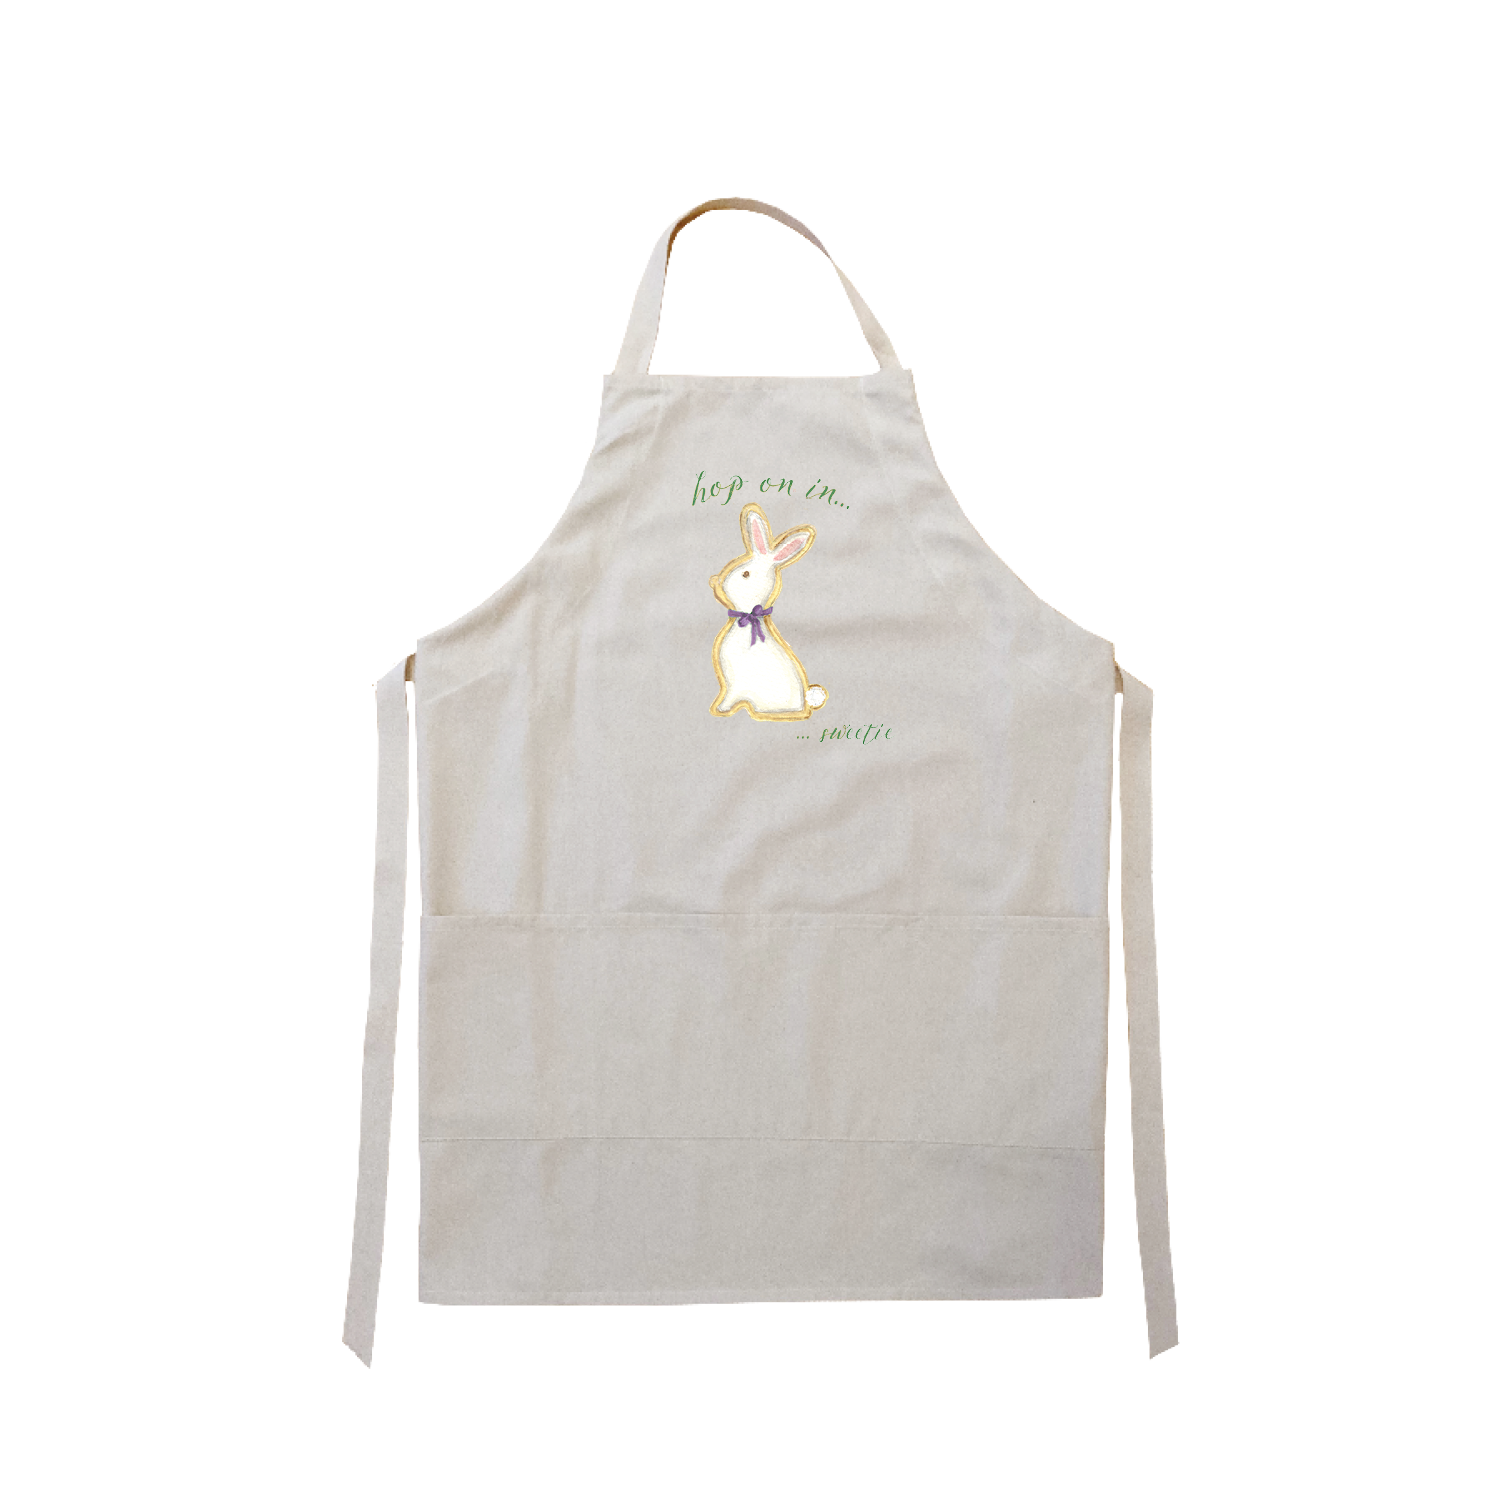 hop on in purple bow apron